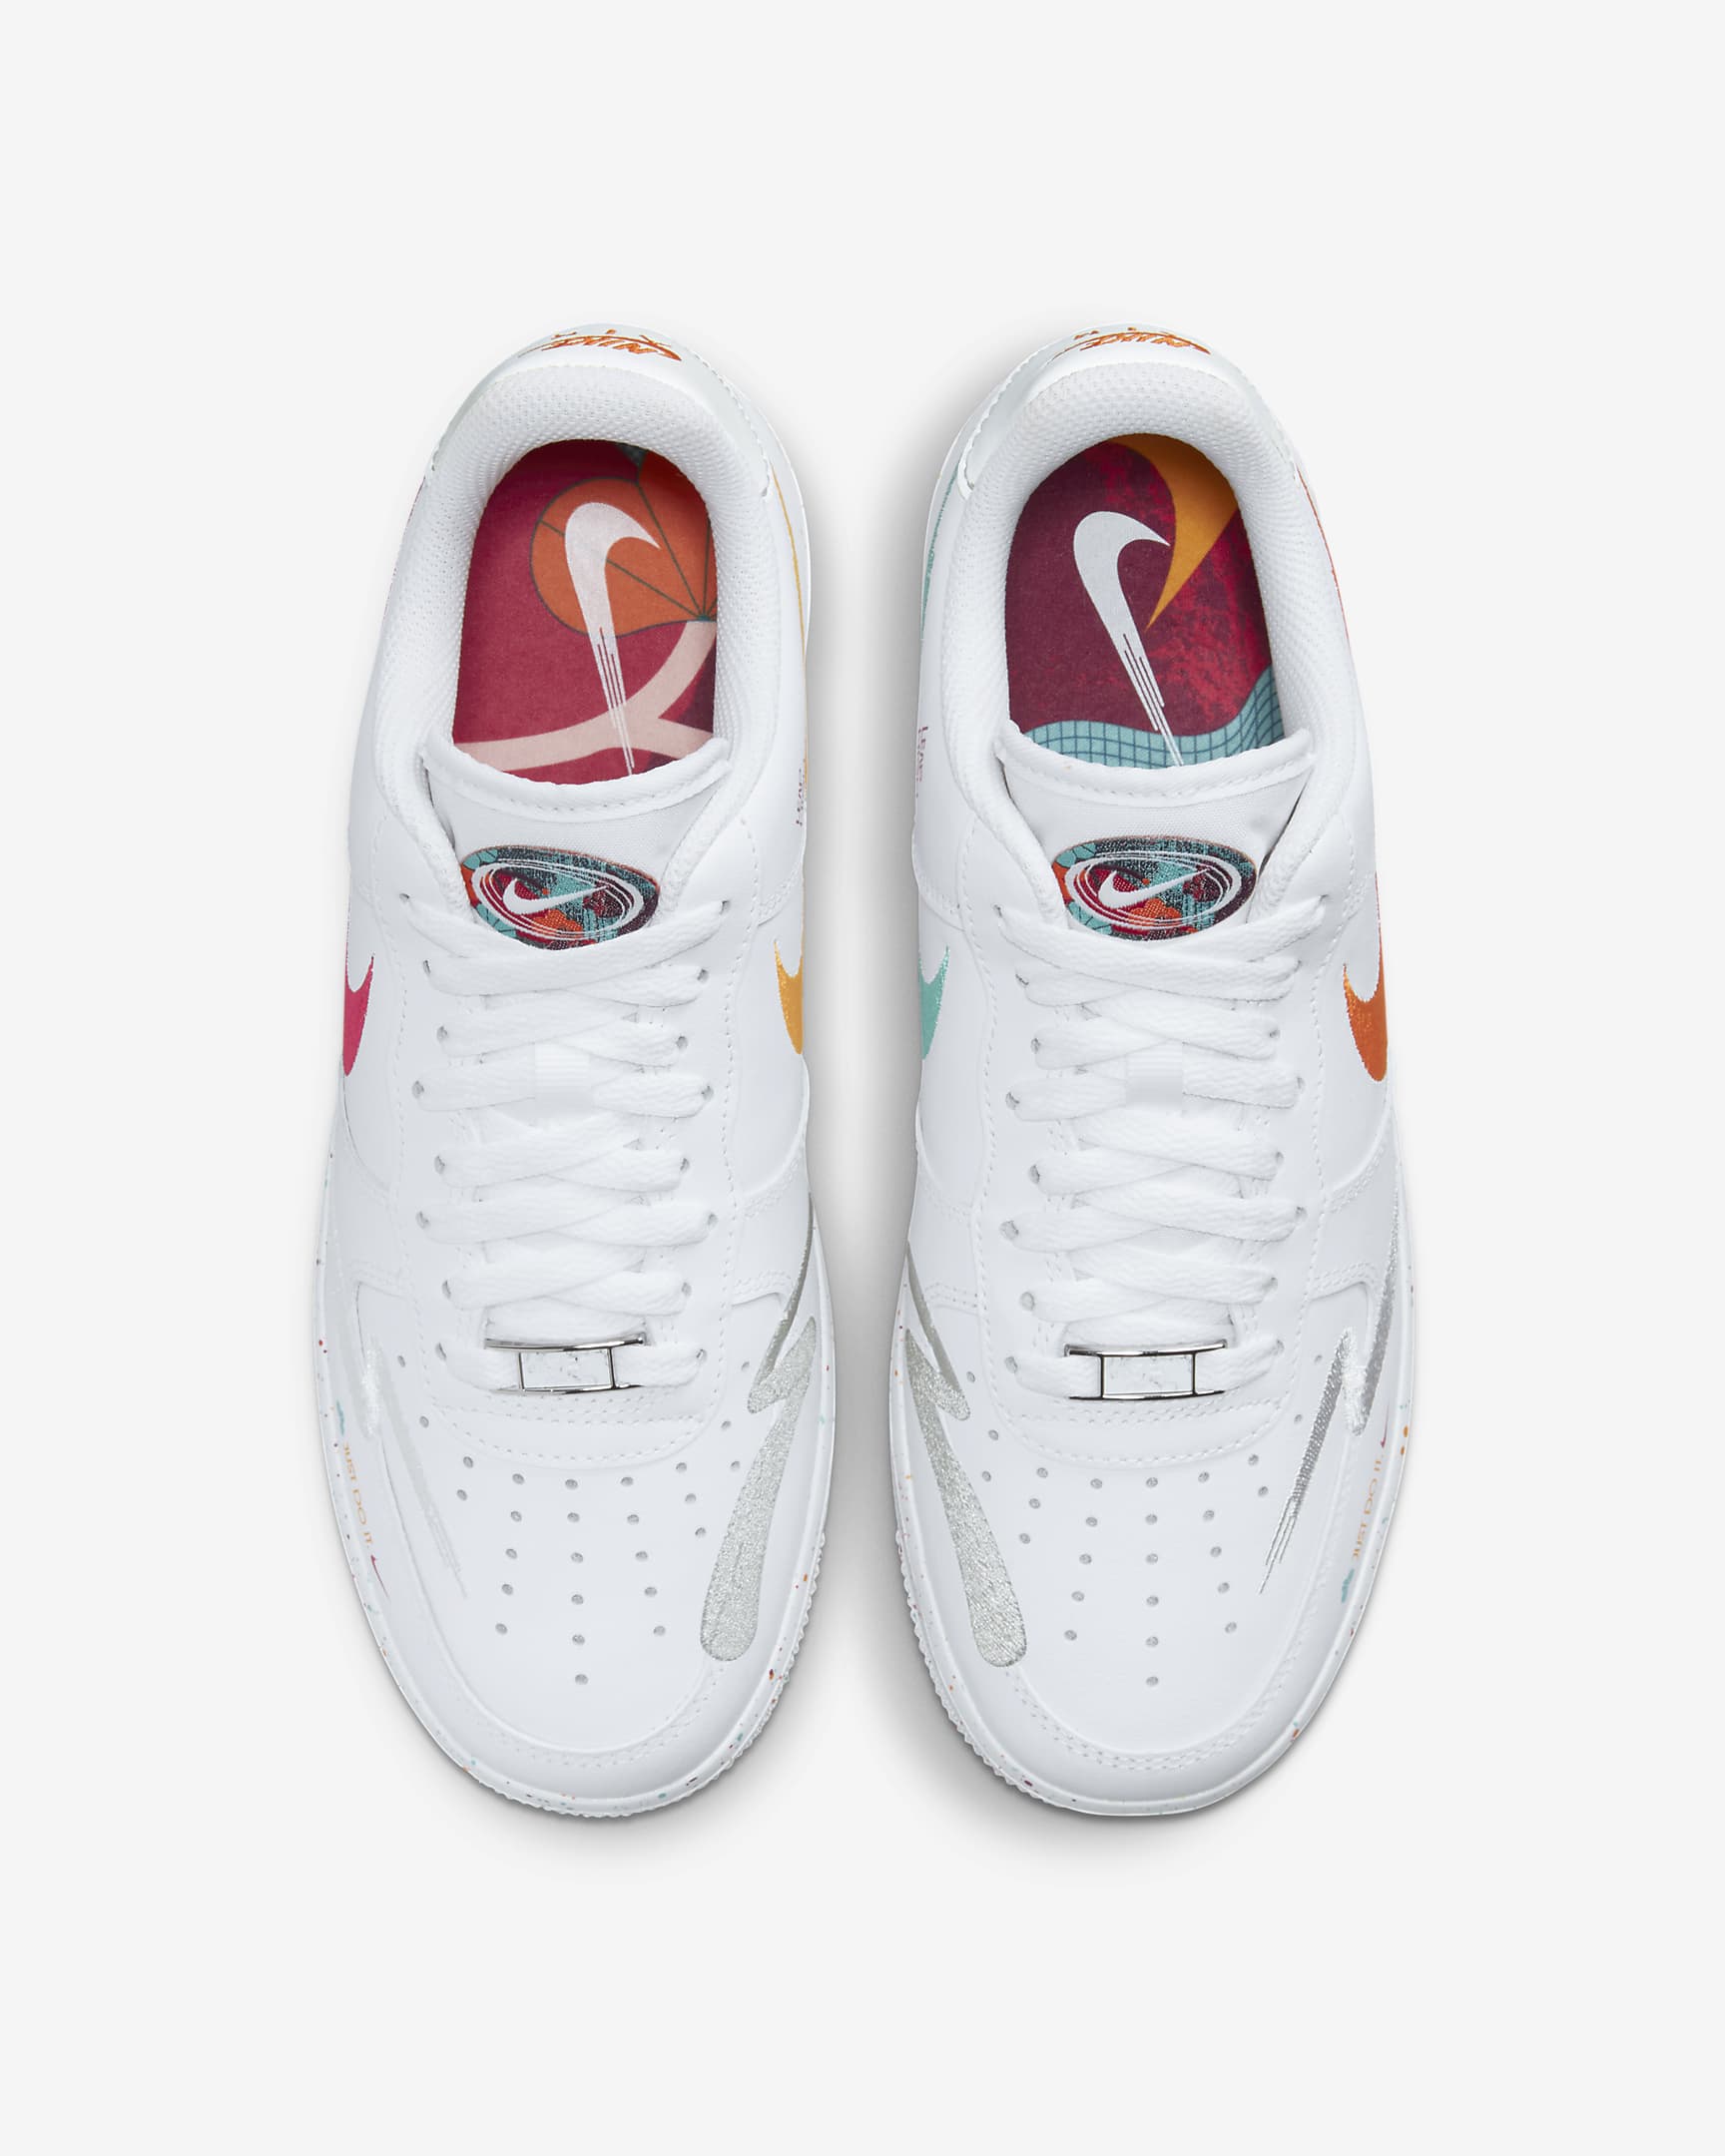 Nike Air Force 1 '07 LX Women's Shoes - White/White/Safety Orange/Washed Teal